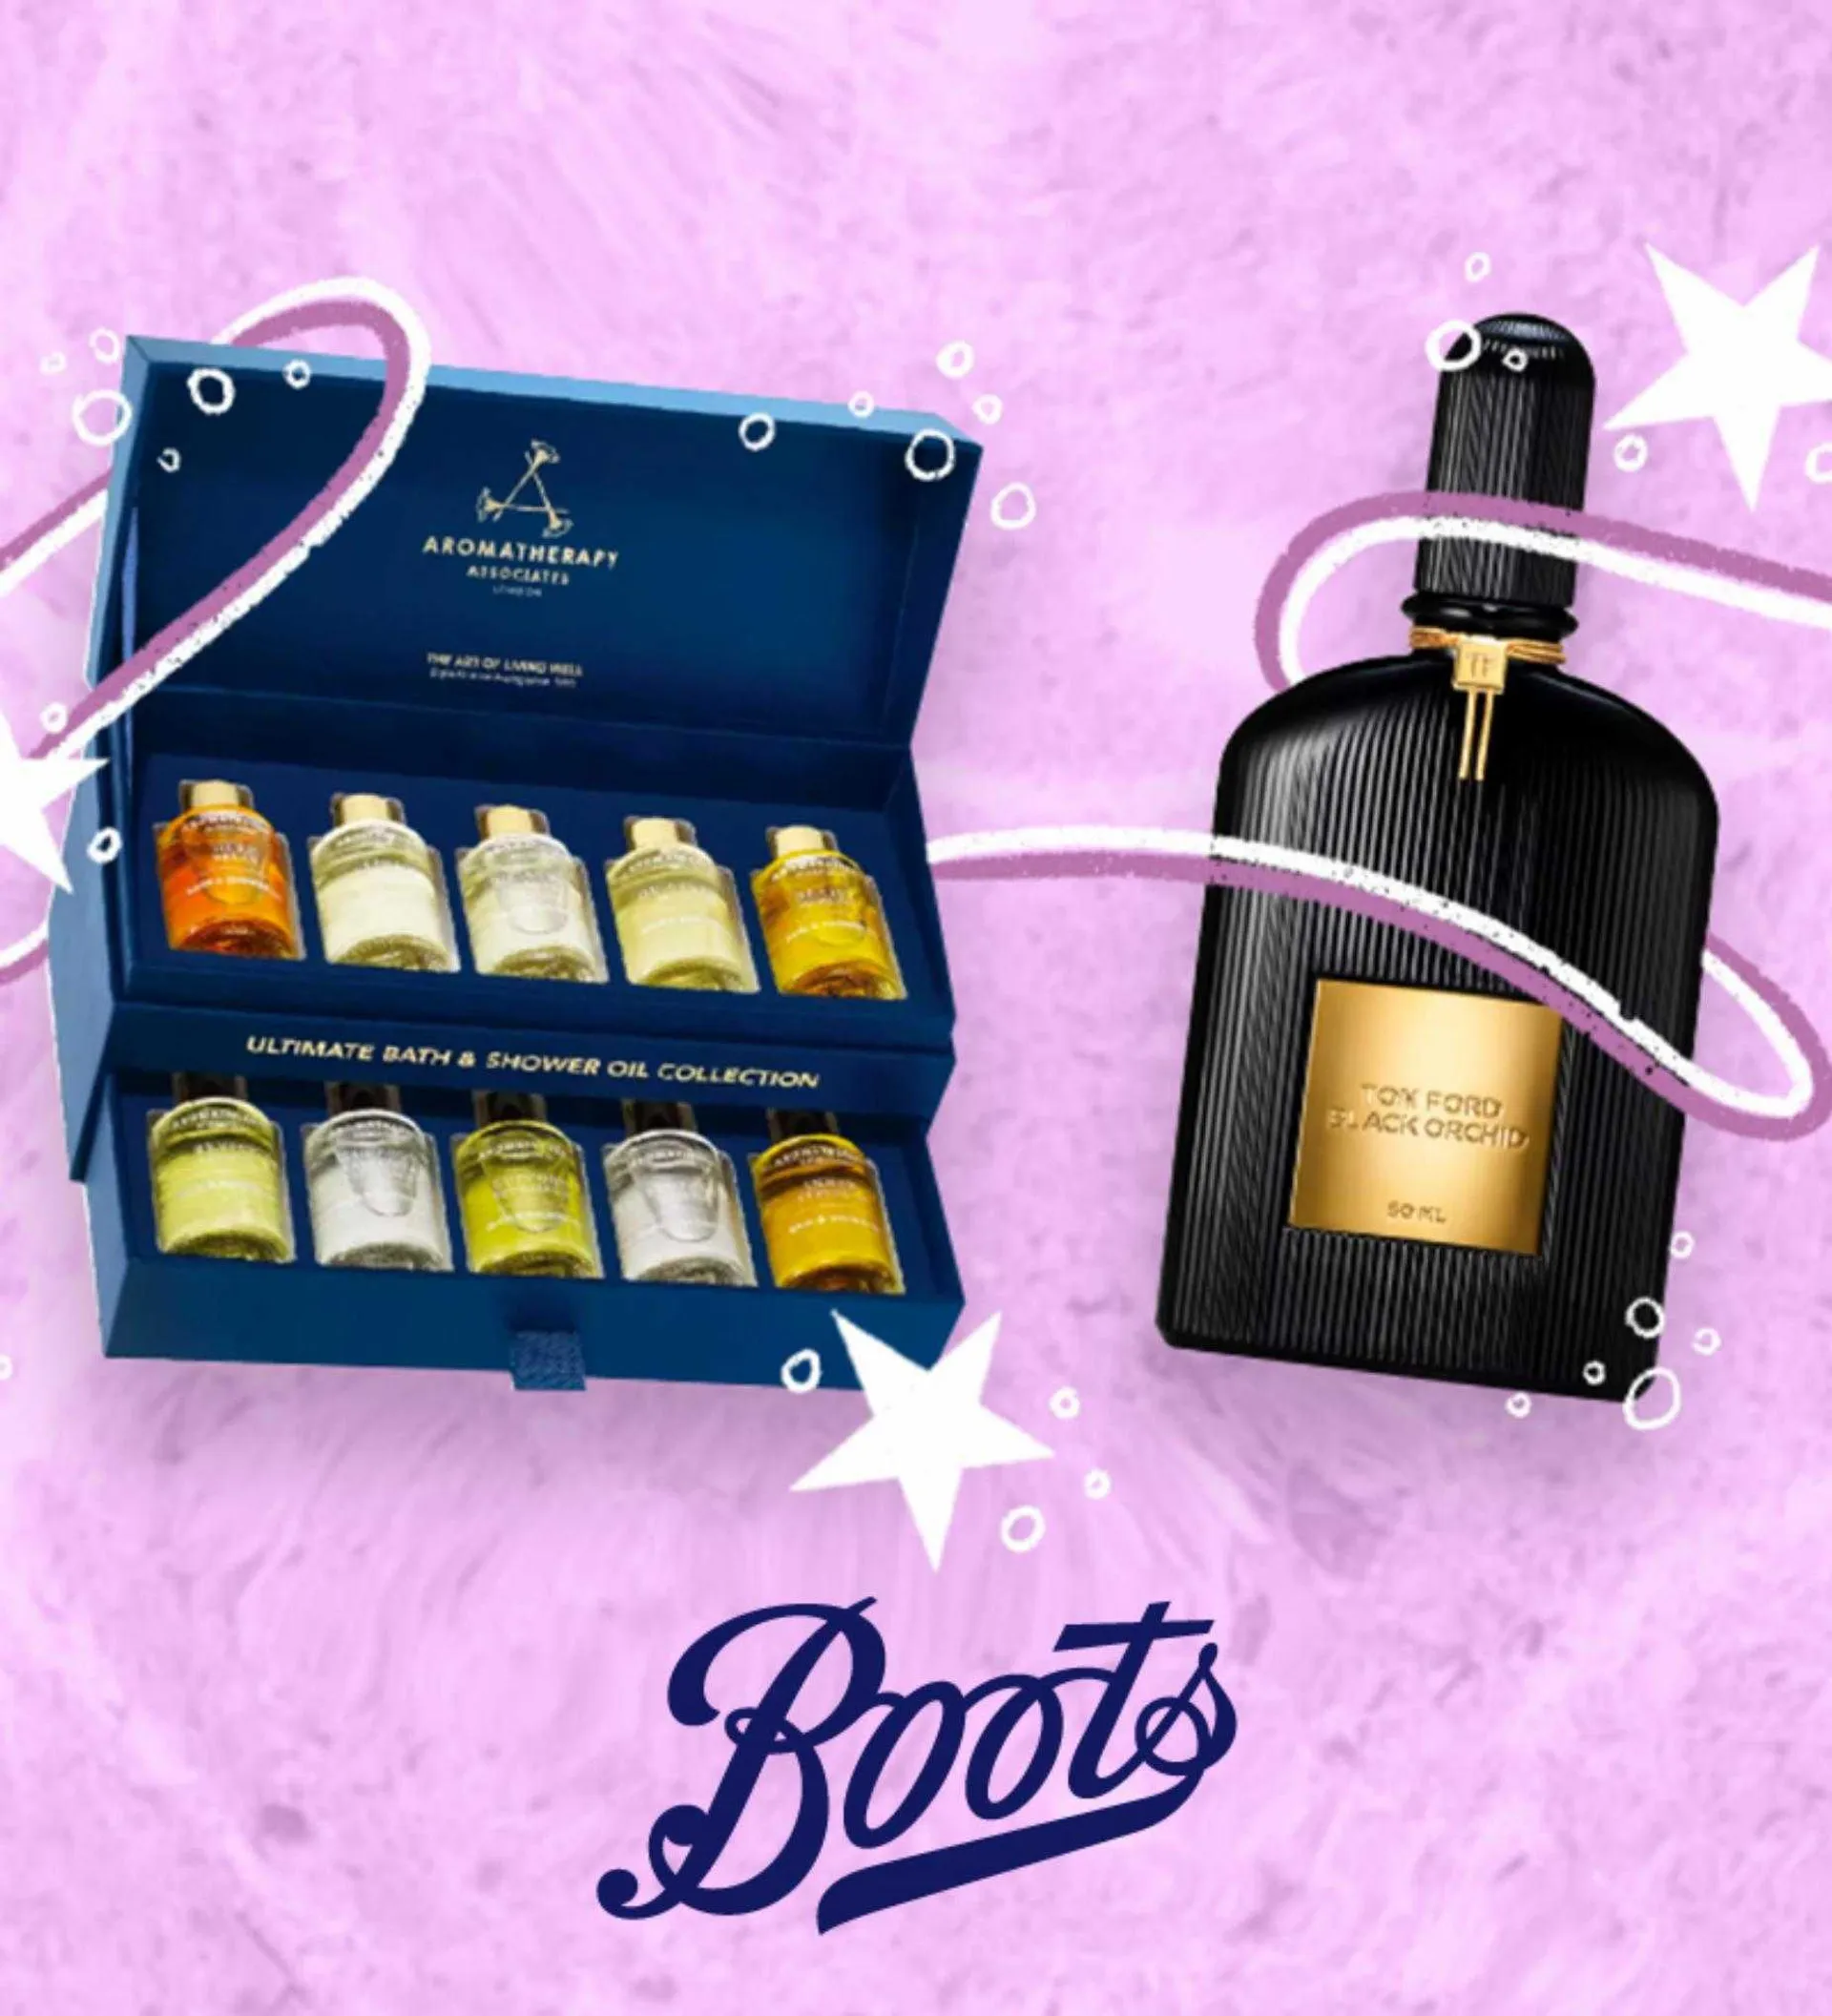 Boots Weekly Offers - 1